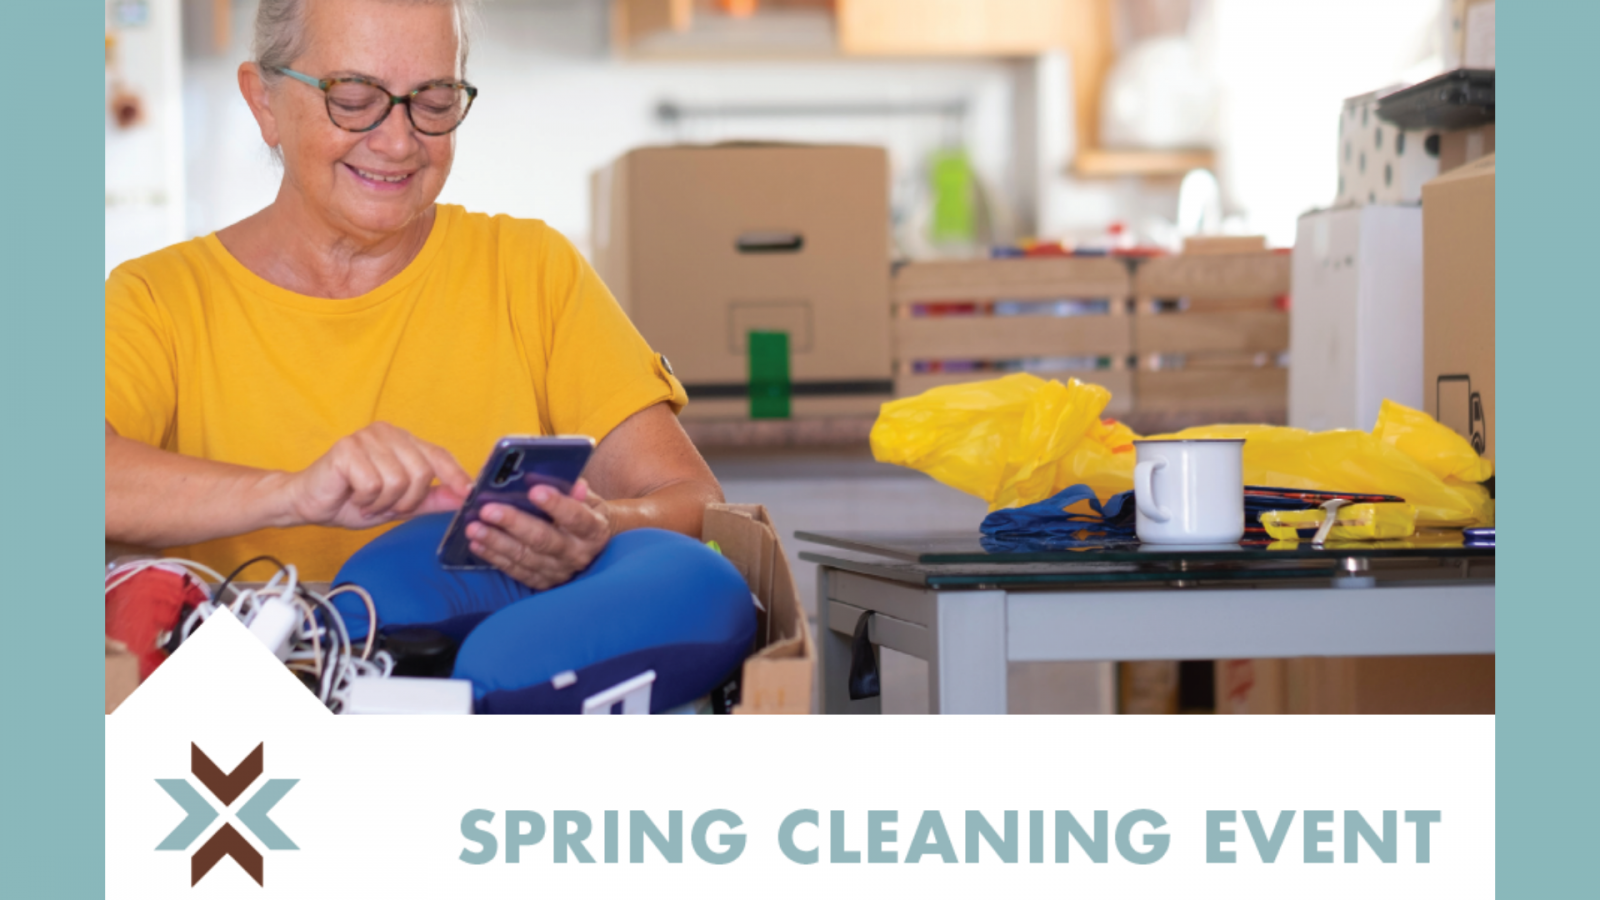 Virtual Spring Cleaning and Downsizing Event in Chanhassen